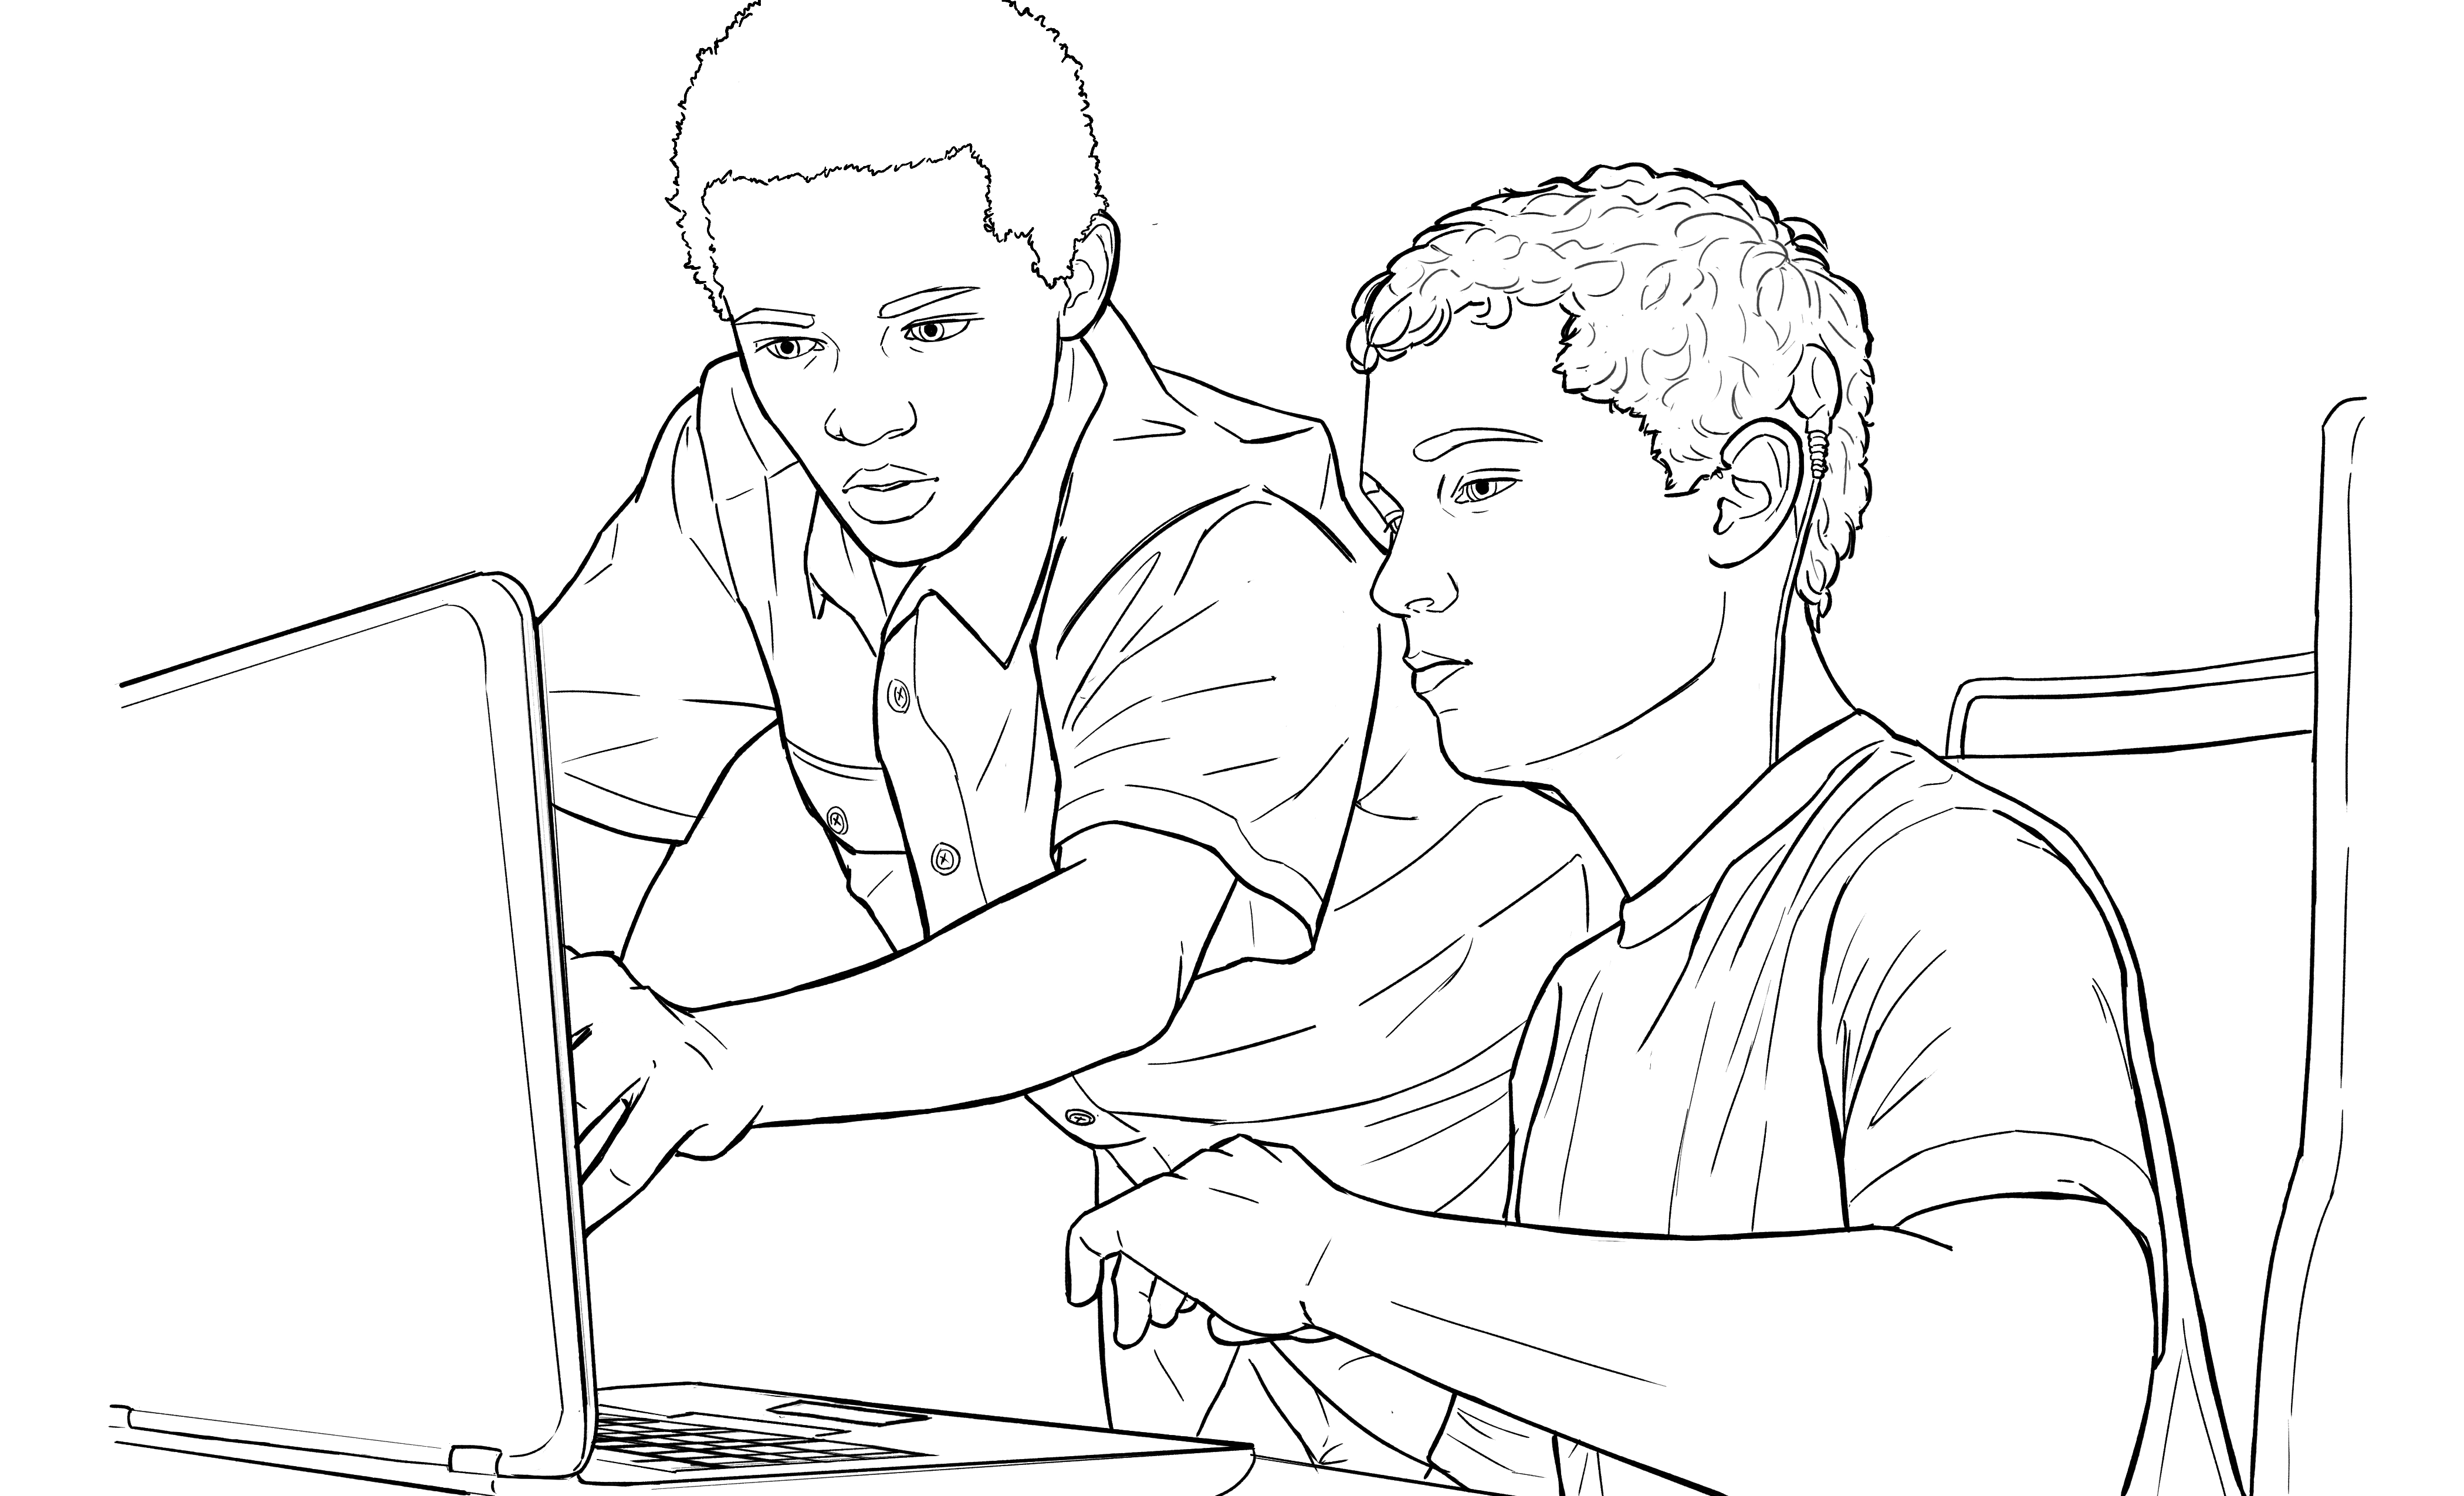 Two people using a laptop, one pointing and the other looking.